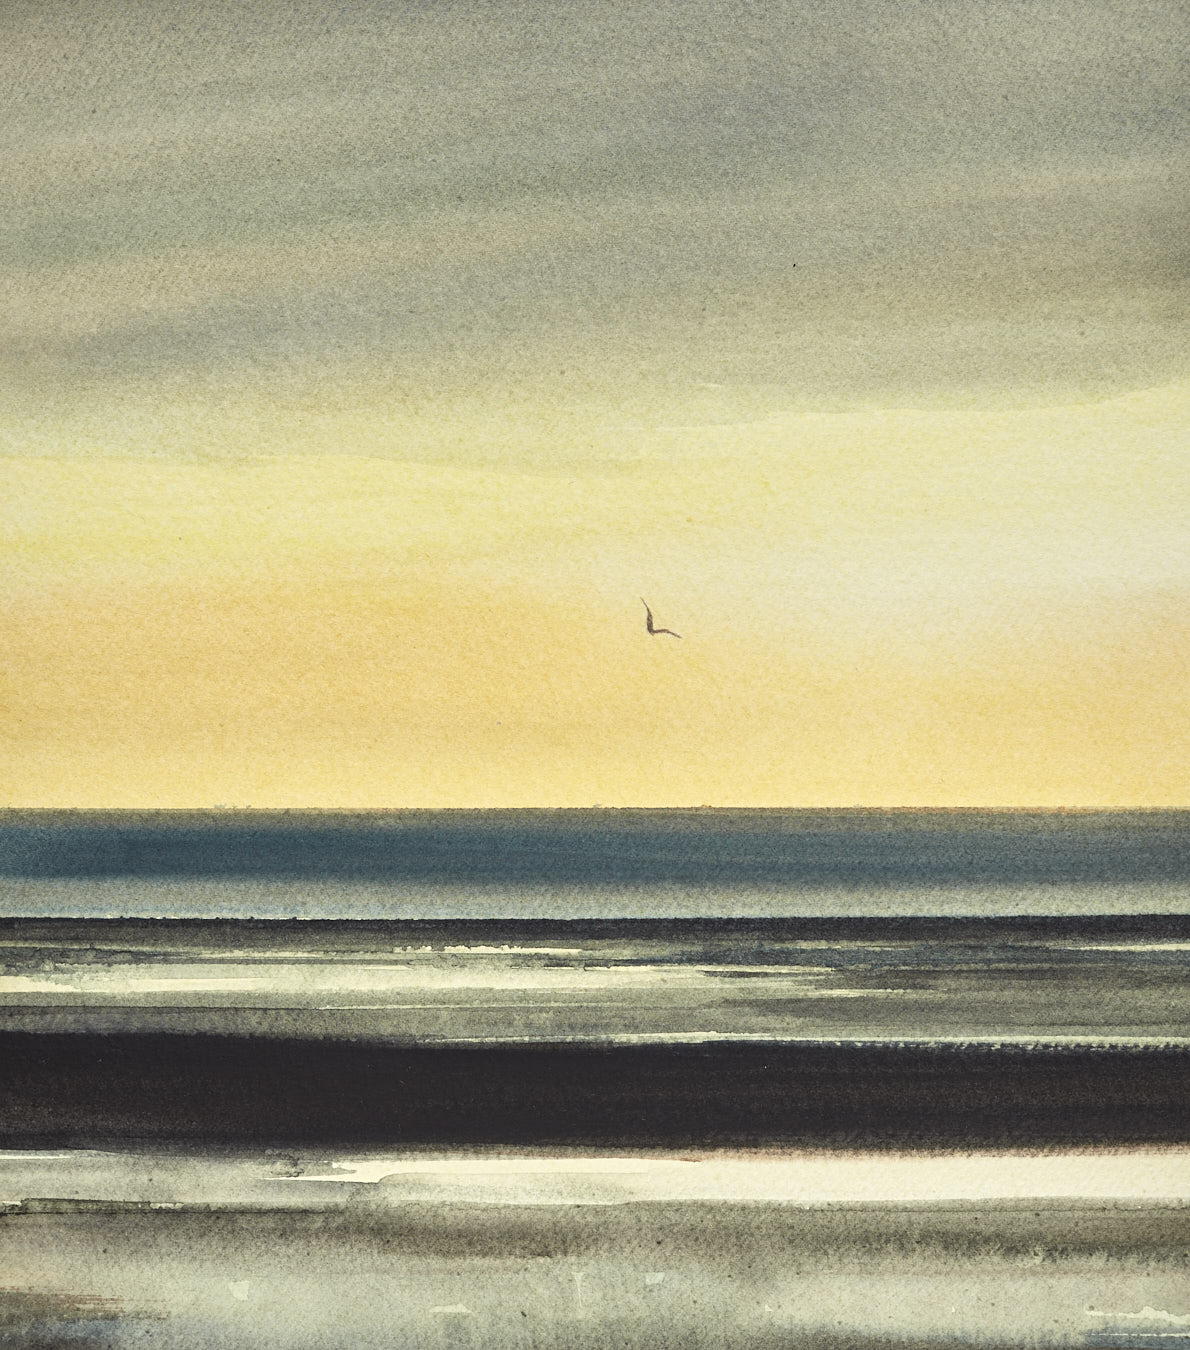 Large image of Sunset over the tide original watercolour painting